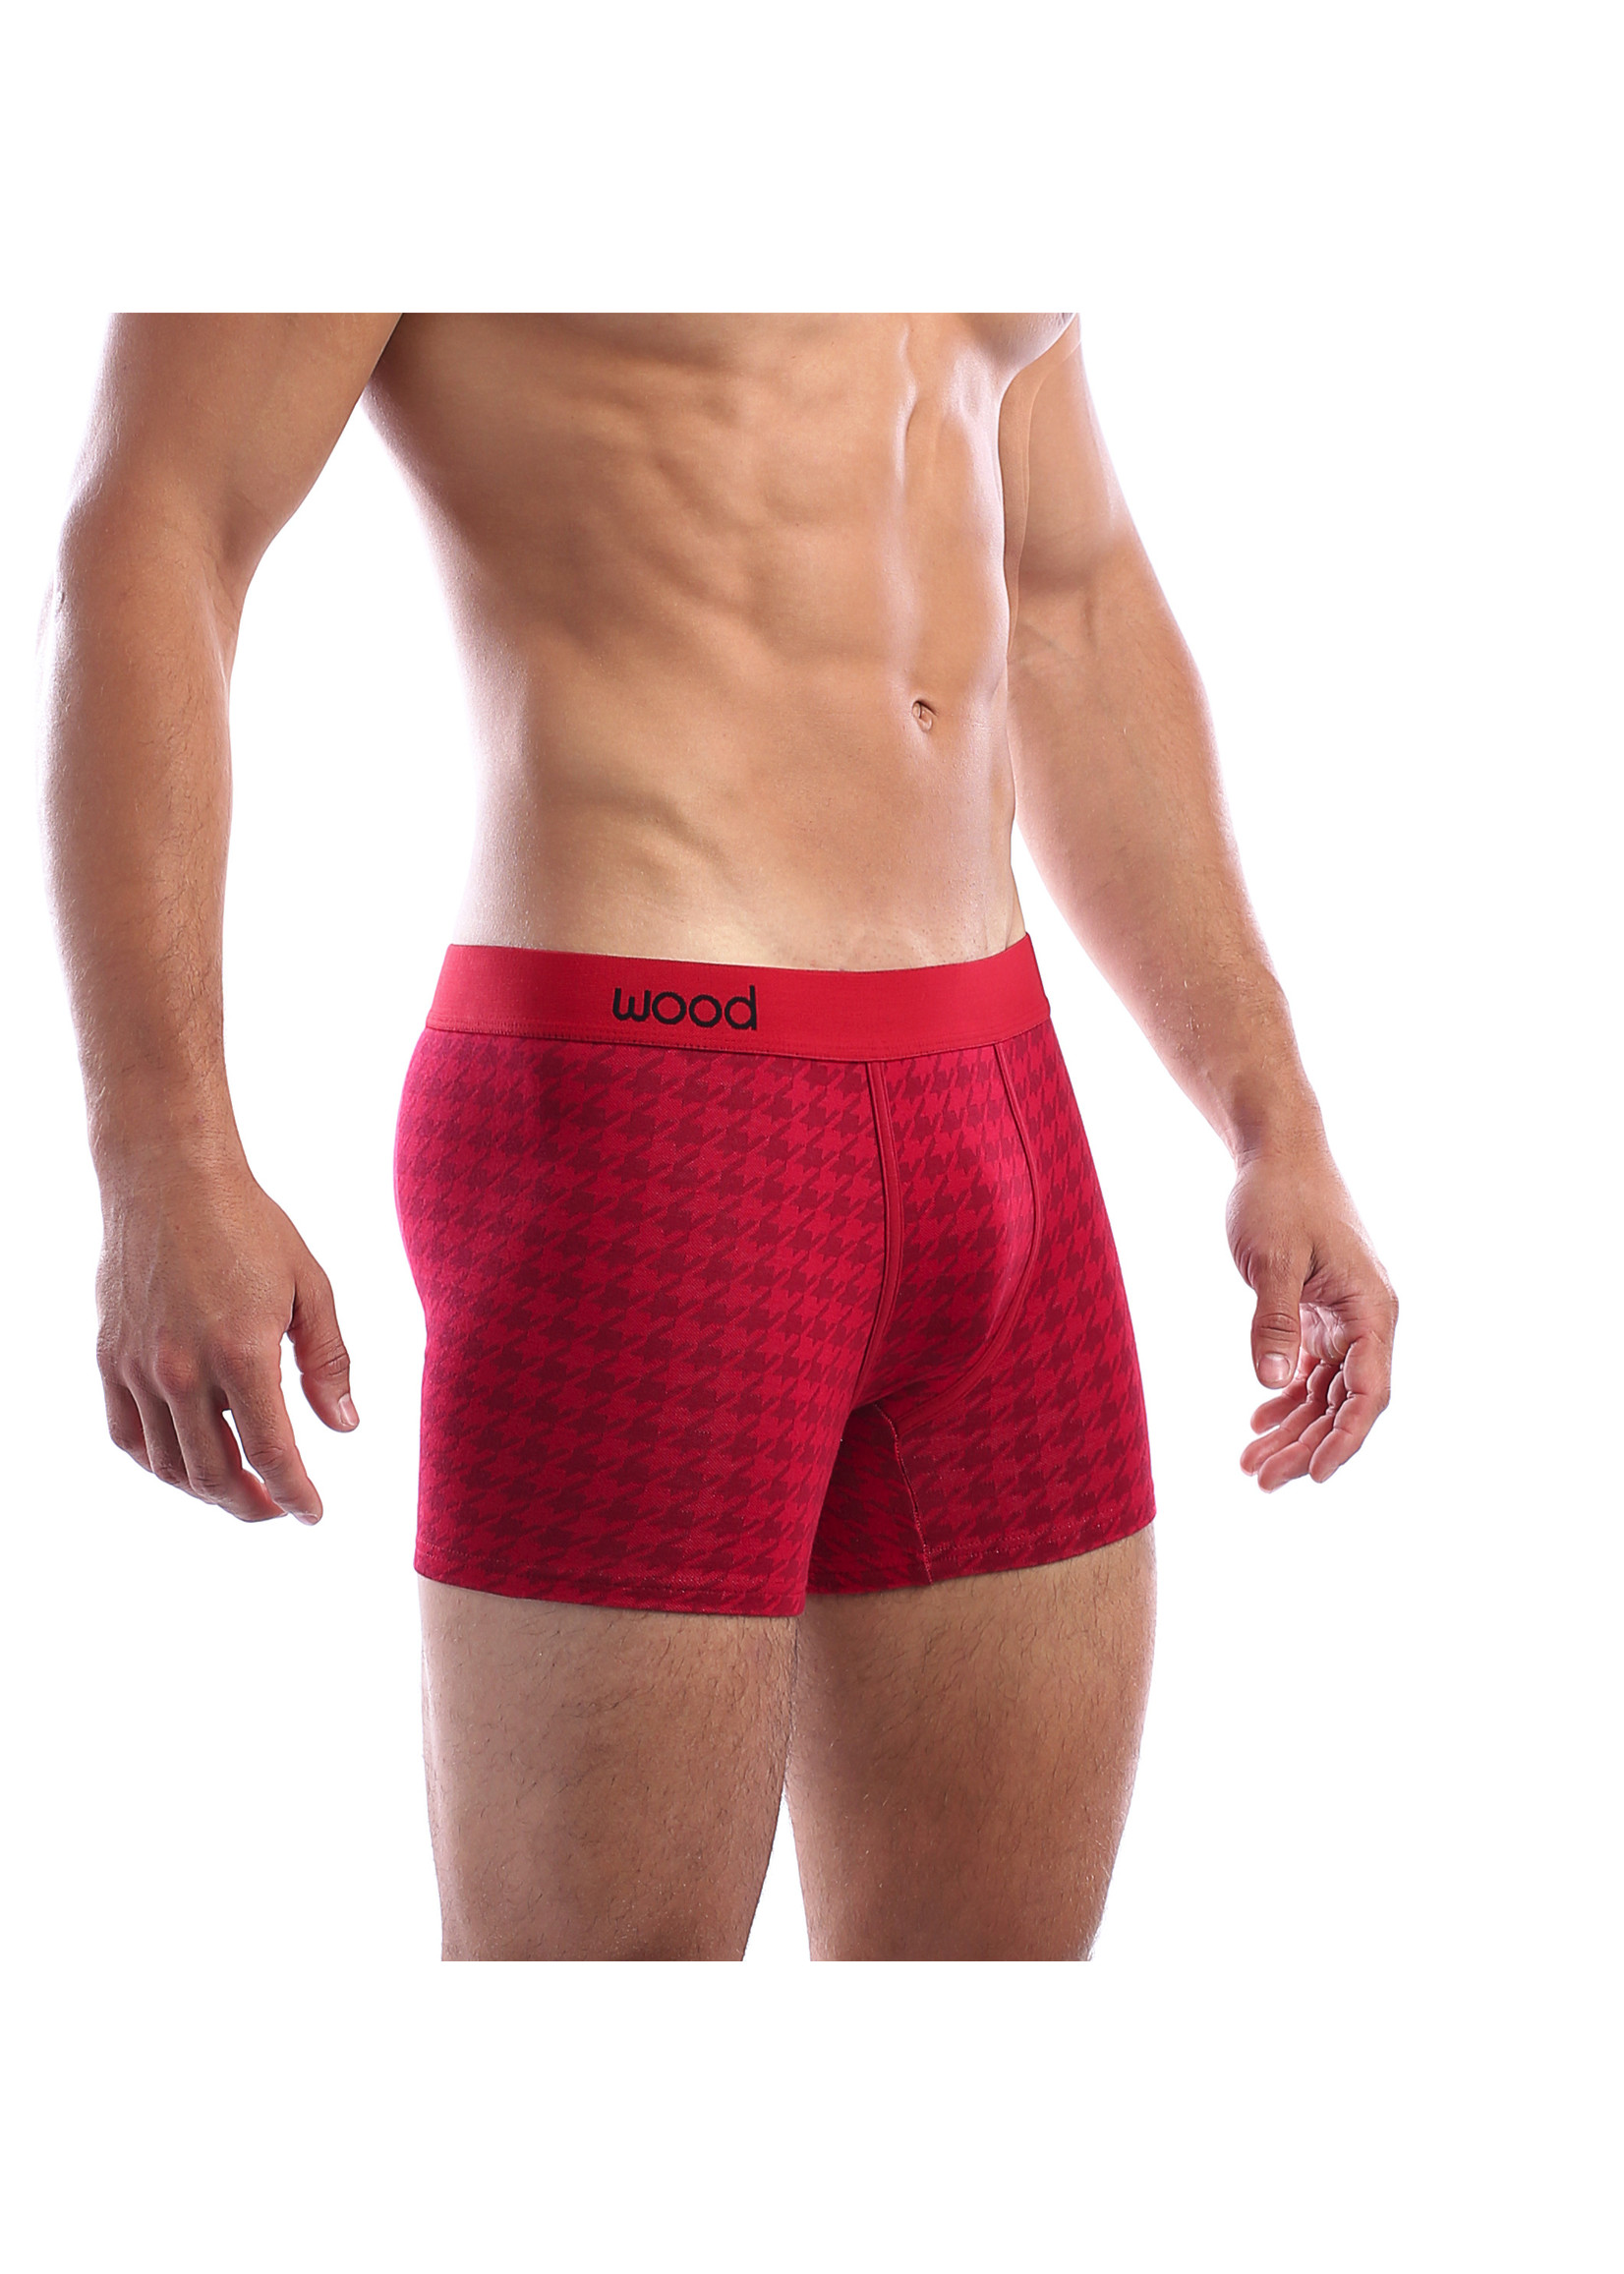 Wood WOOD 4501T Boxer Brief w/Fly